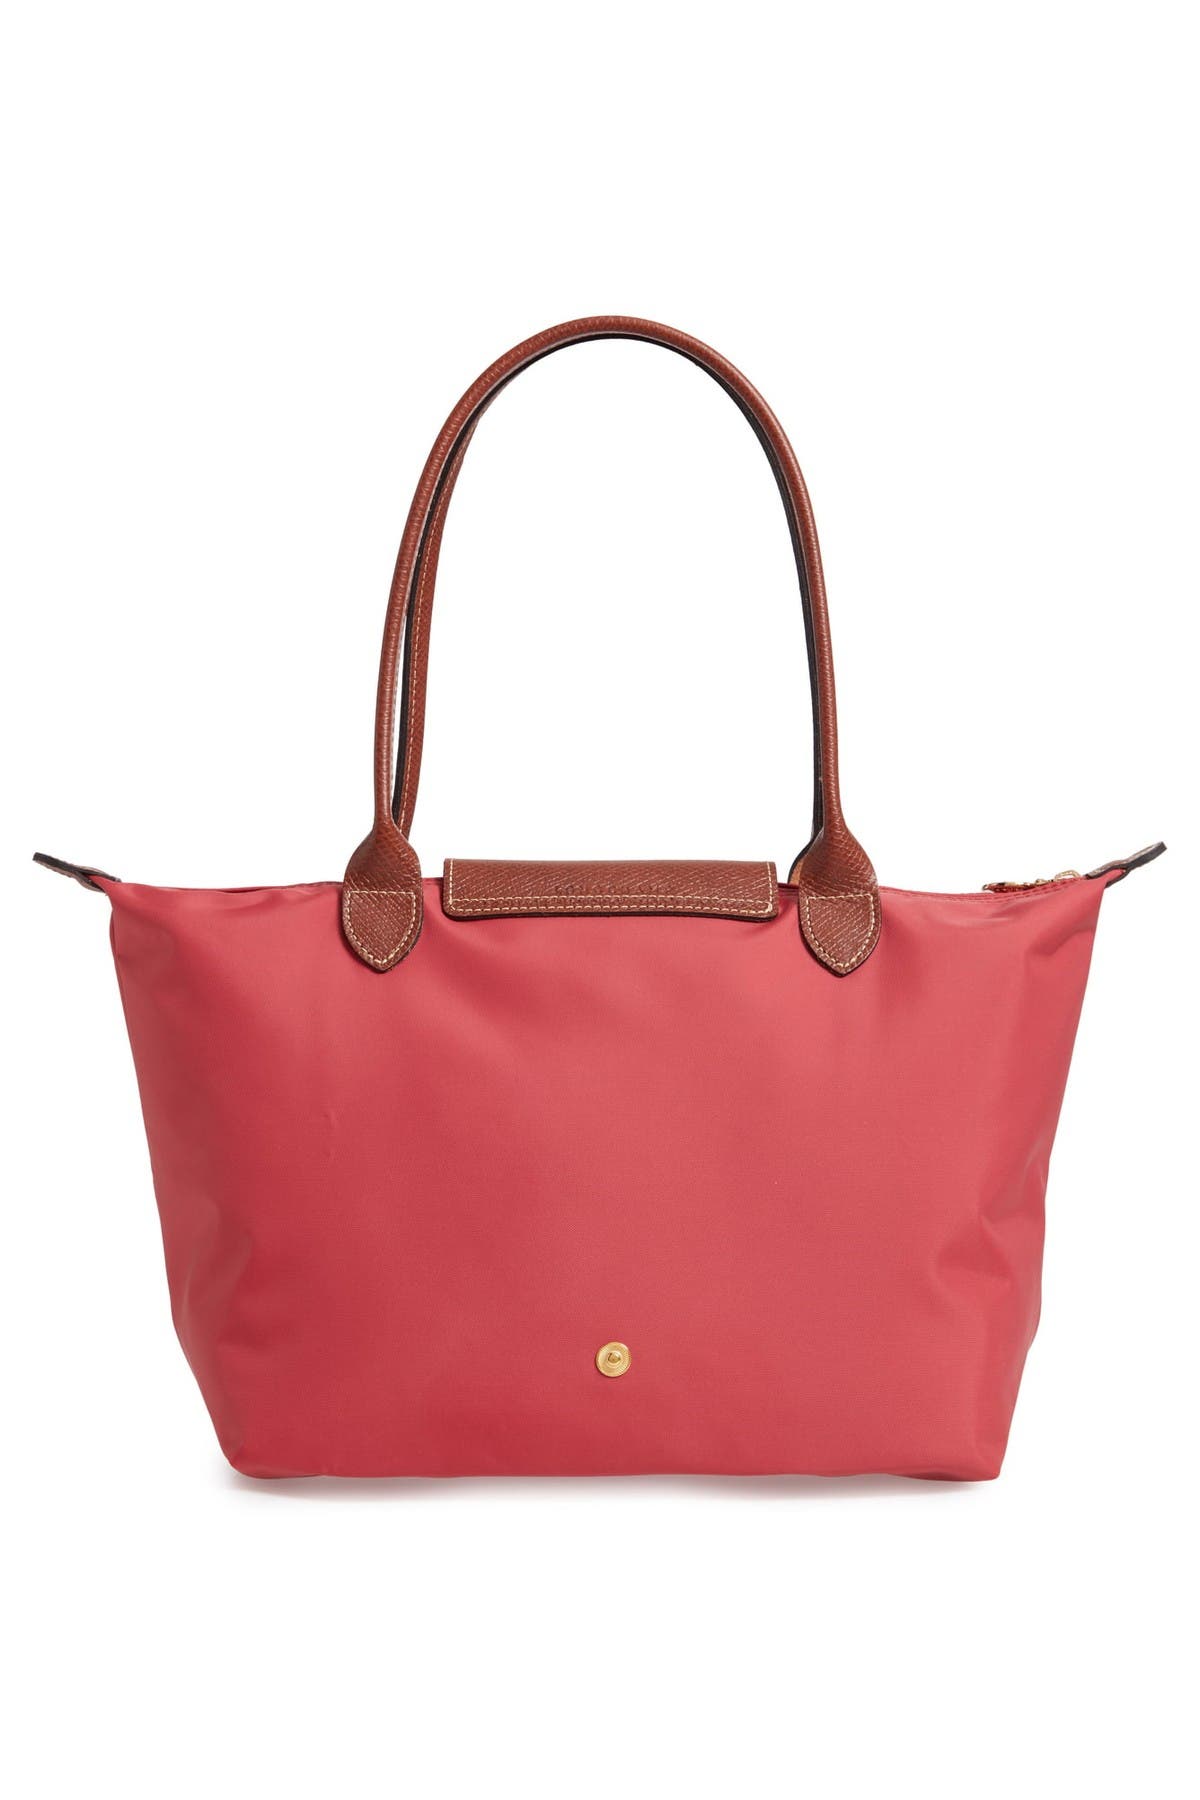 LONGCHAMP | Small Le Pliage Tote | Nordstrom Rack